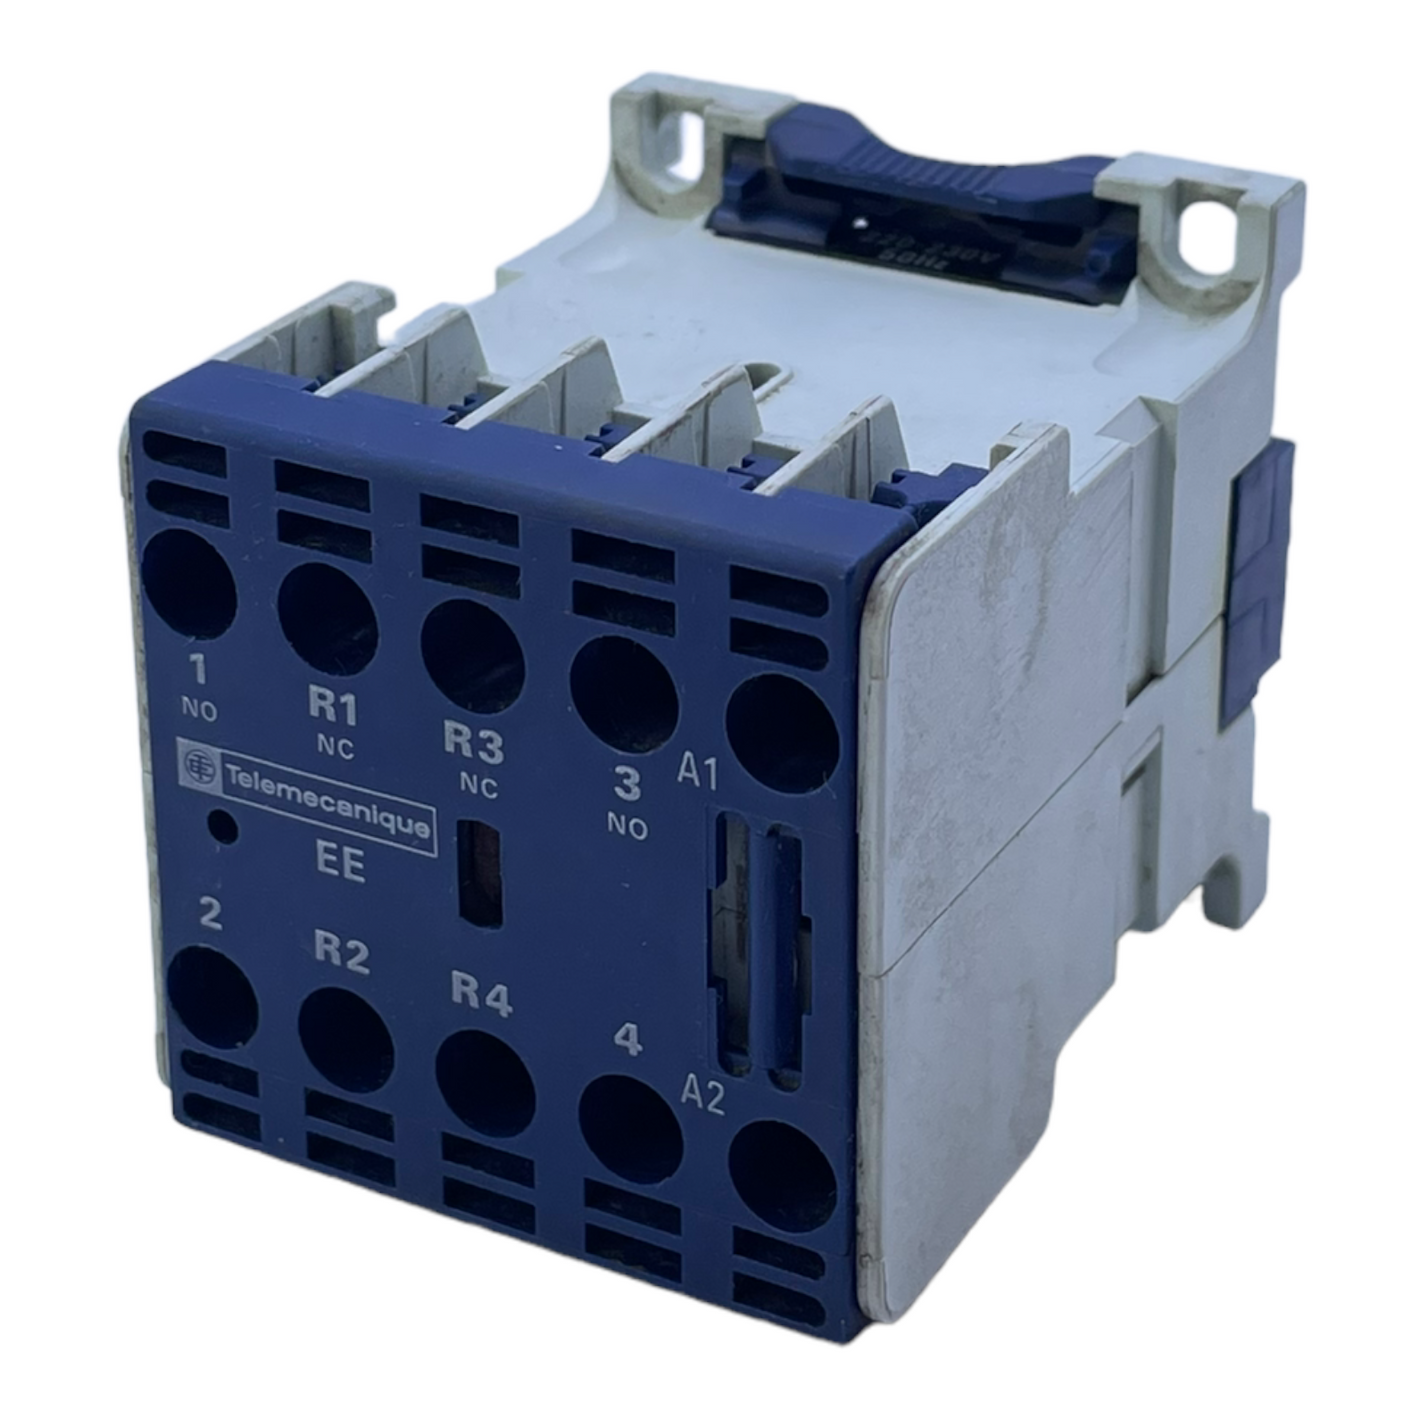 Telemanique LC1-EE-08 circuit breaker for industrial use 220-230V 50Hz